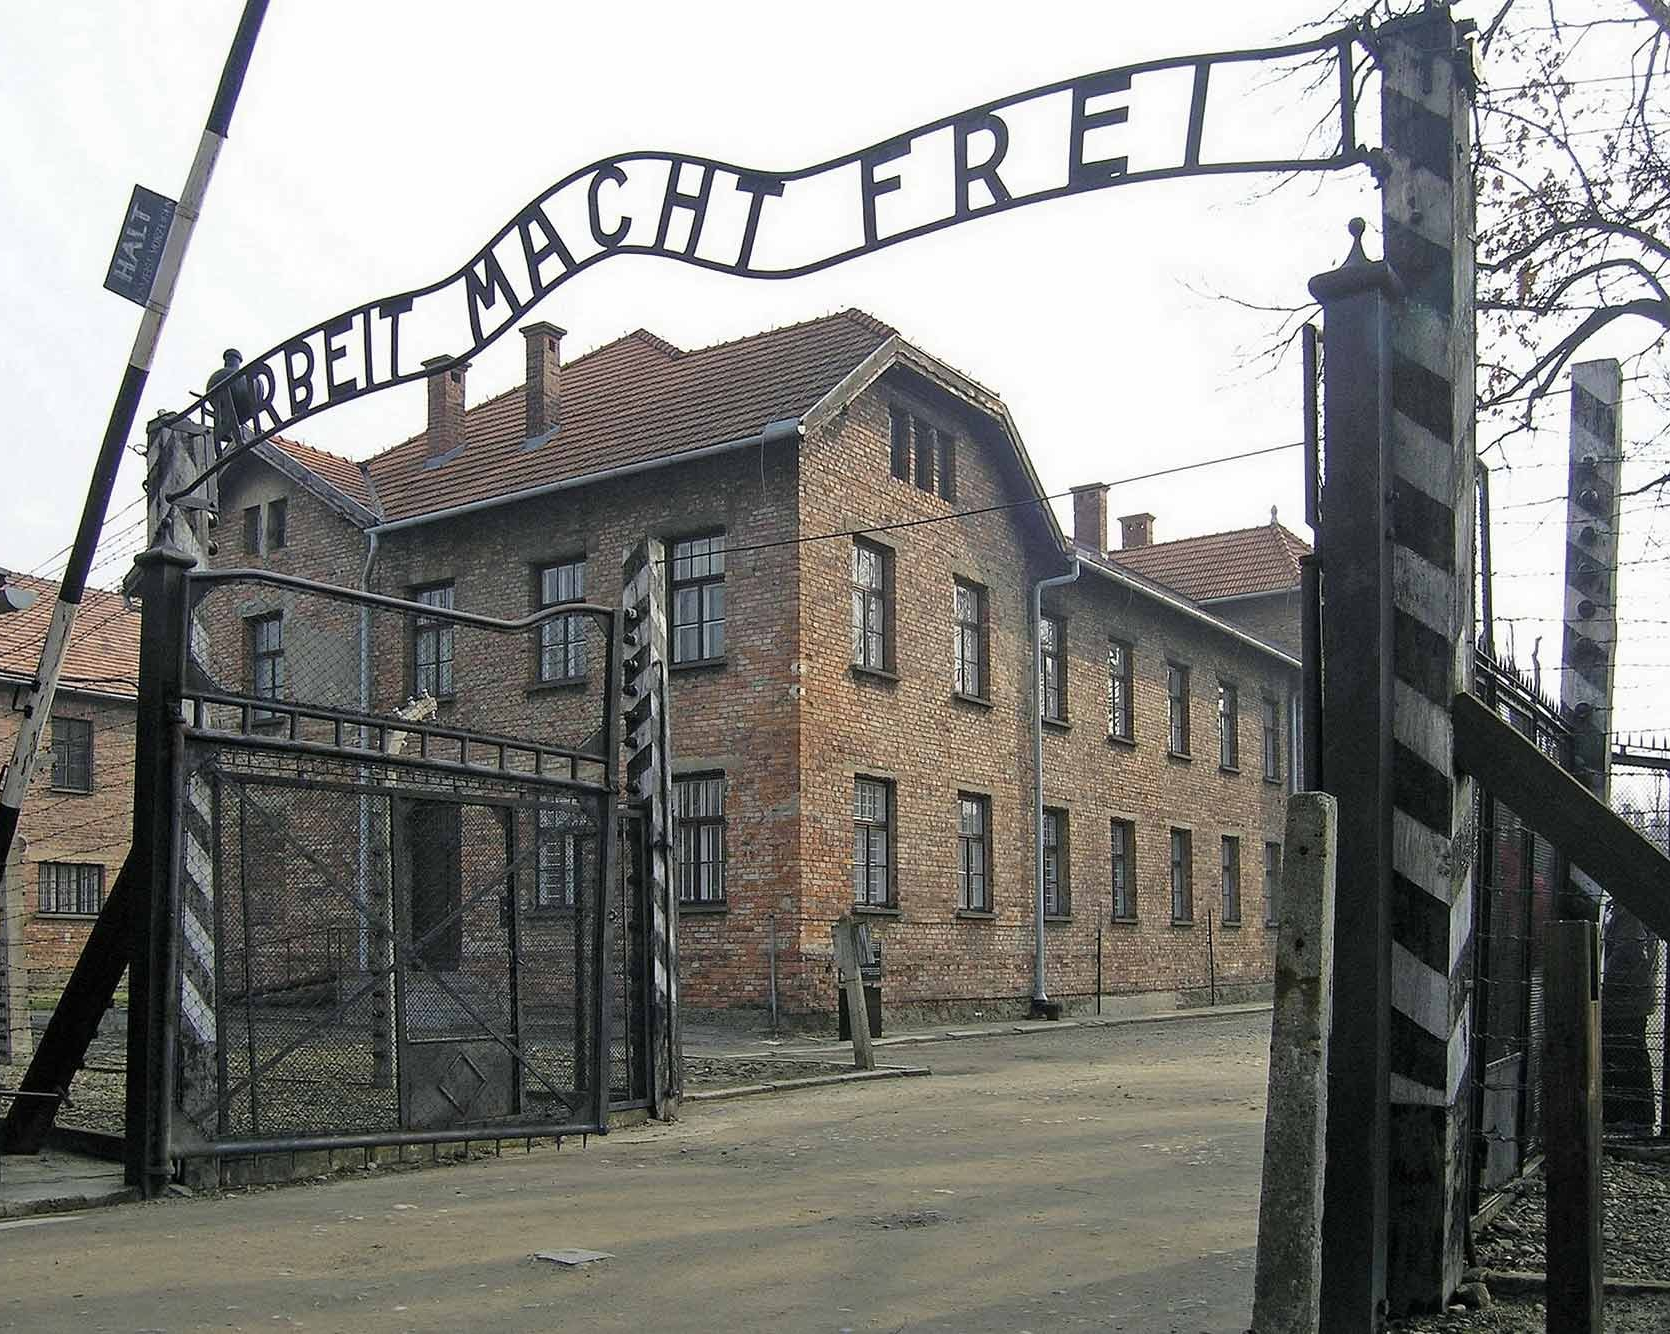 Remembering the Holocaust can help prevent genocide